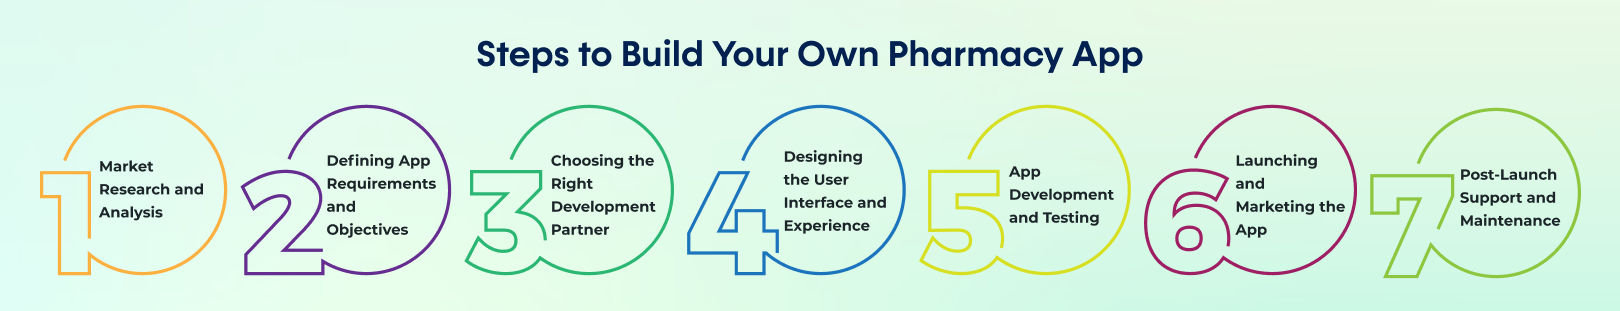 Steps to Build Your Own Pharmacy App